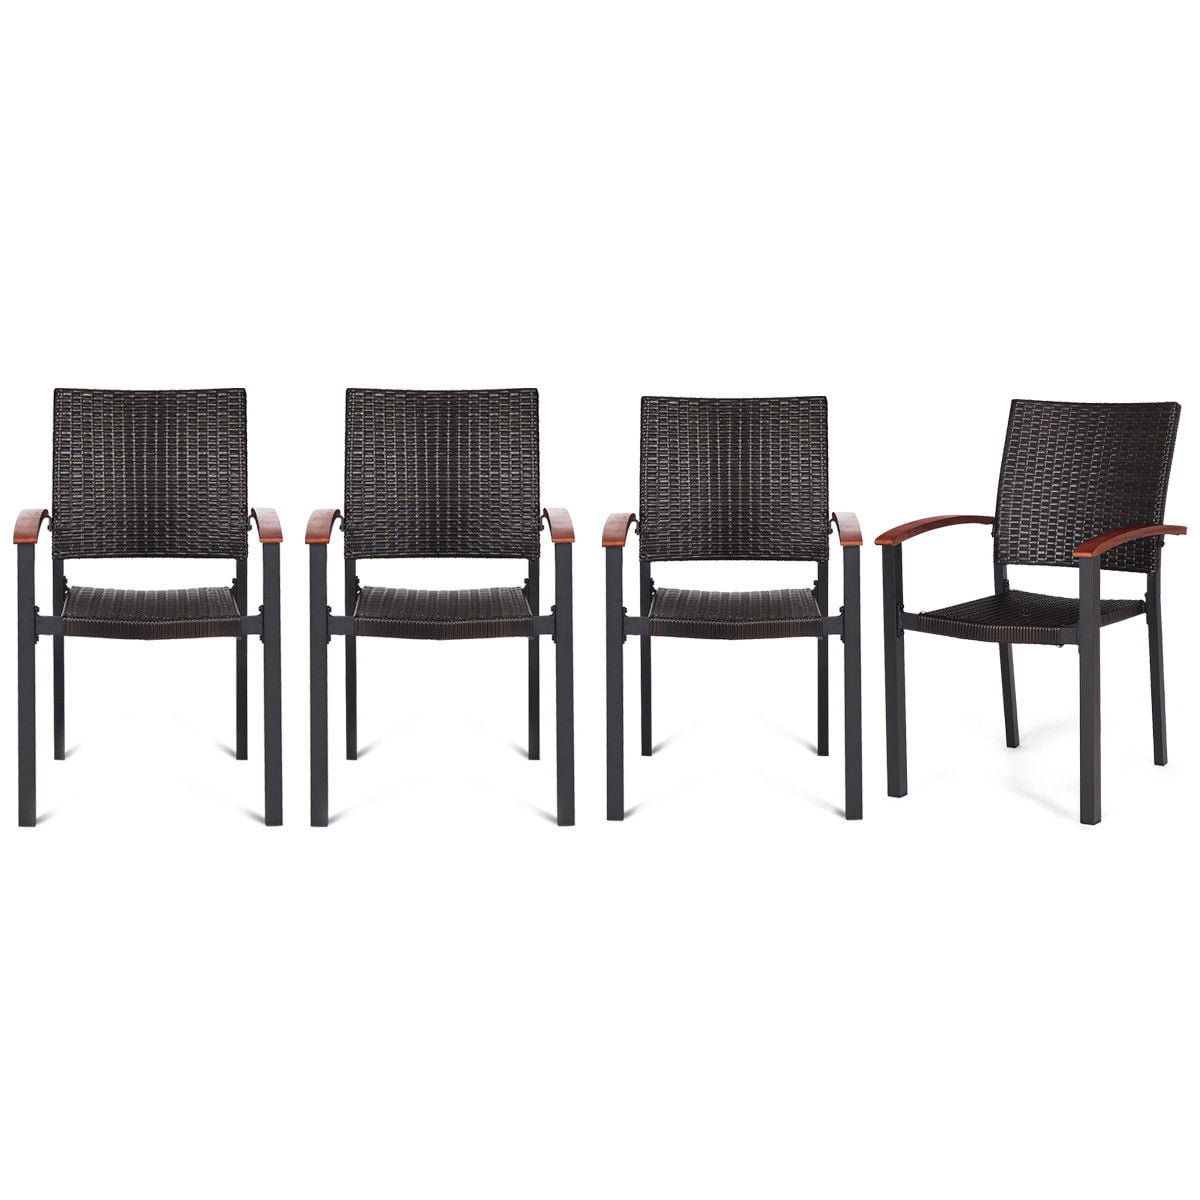 4PCS Patio Rattan Dining Chairs Armchair Stackable Wicker Outdoor Aluminum Frame 